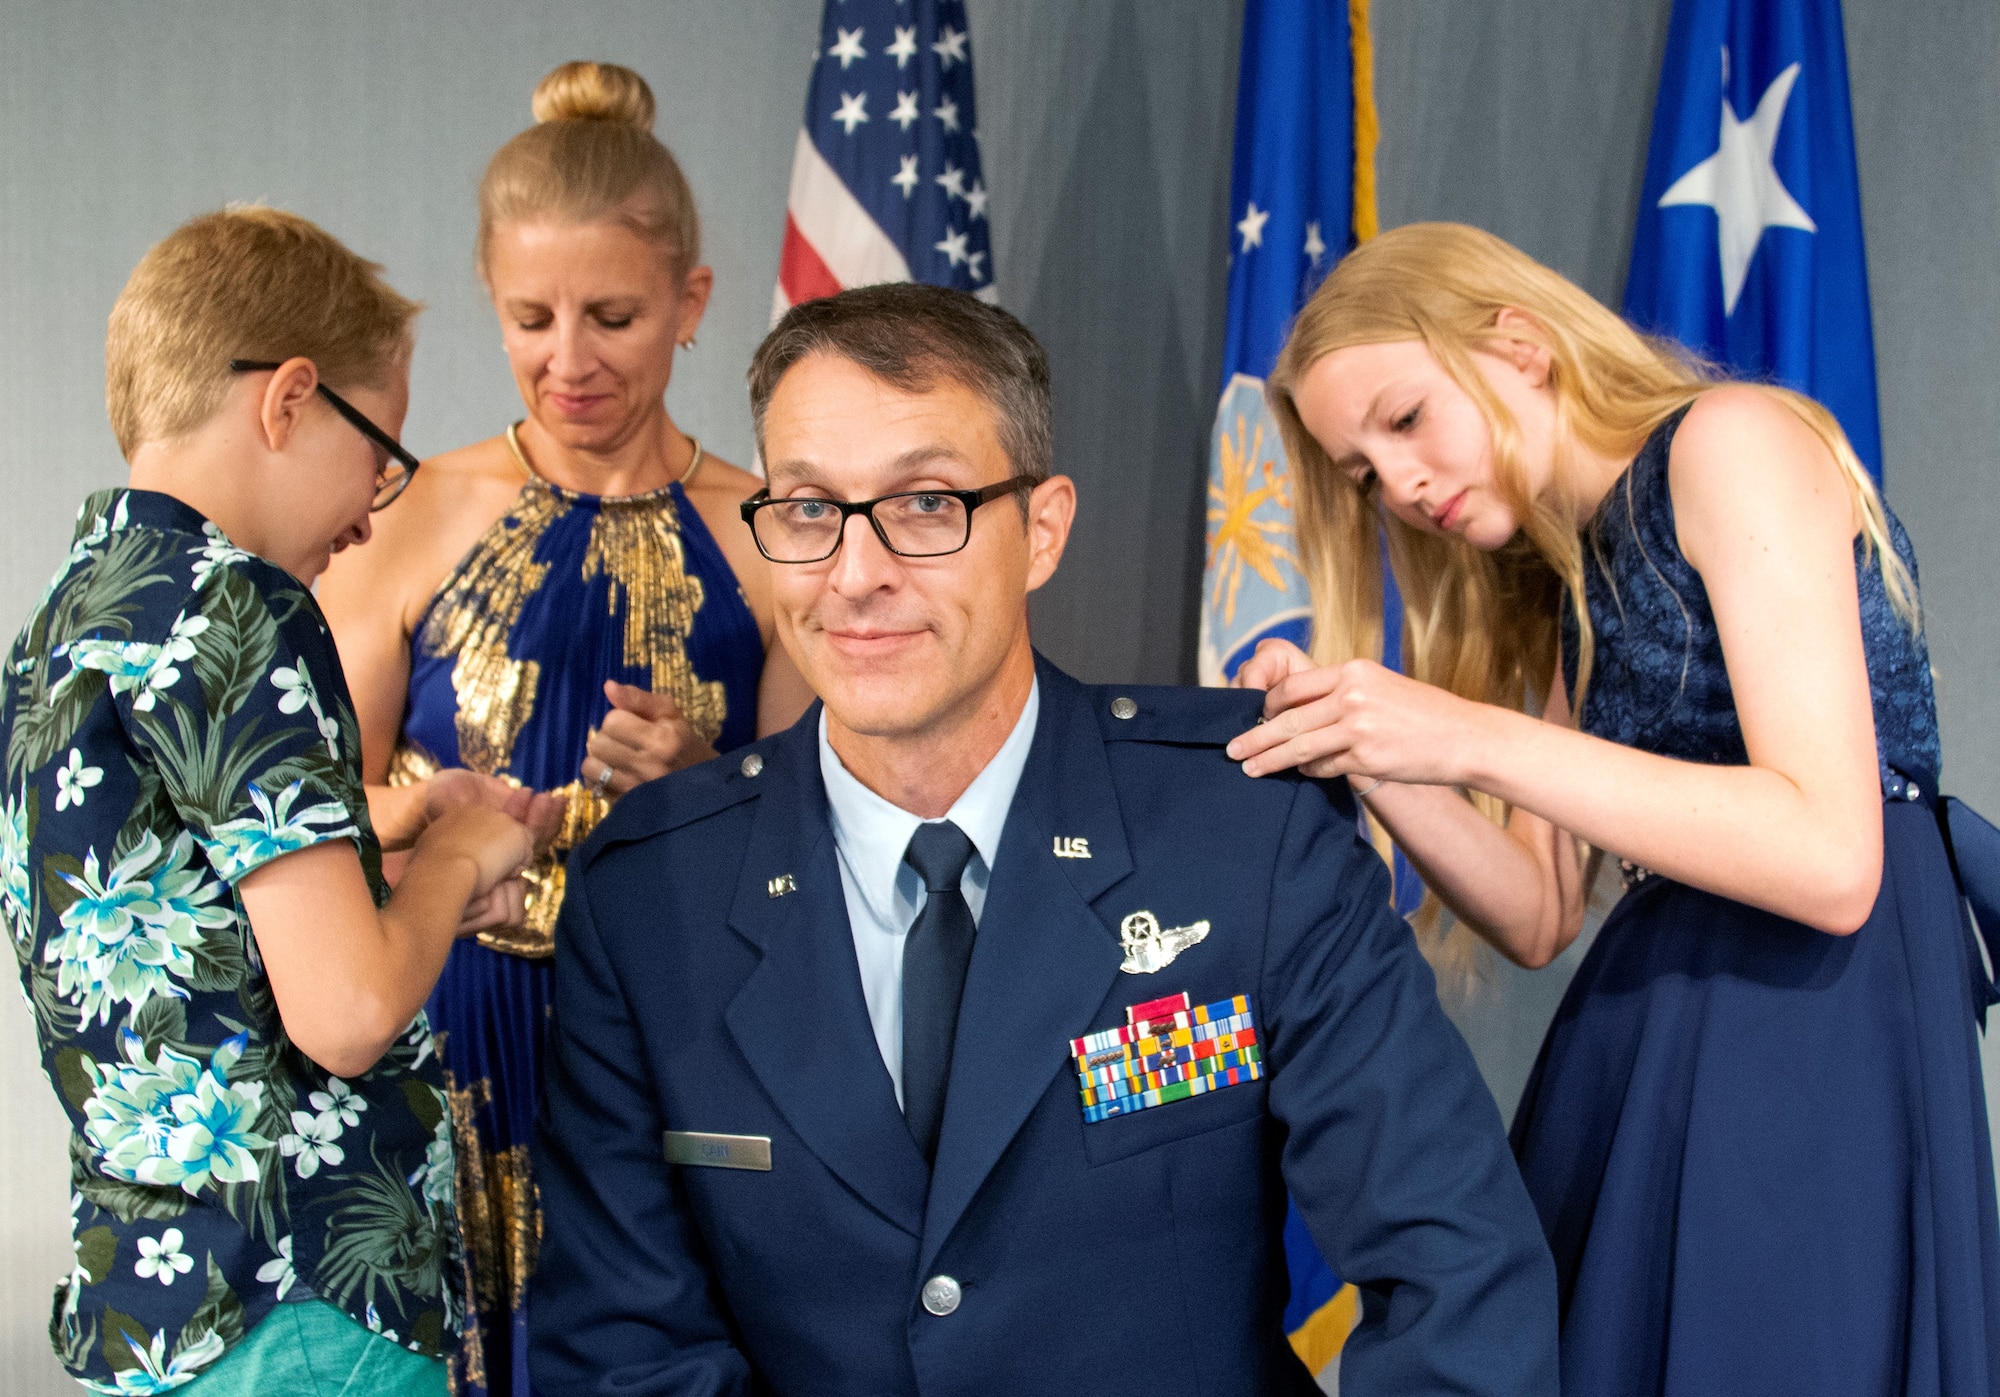 Col Scott A. Cain’s family pin general officer stars to his uniform during his promotion ceremony July 2 at Eglin Air Force Base, Fla. Cain was promoted to the rank of brigadier general prior to taking command of the 96th Test Wing at a later ceremony that day. (U.S. Air Force Photo/Heather Stacy)